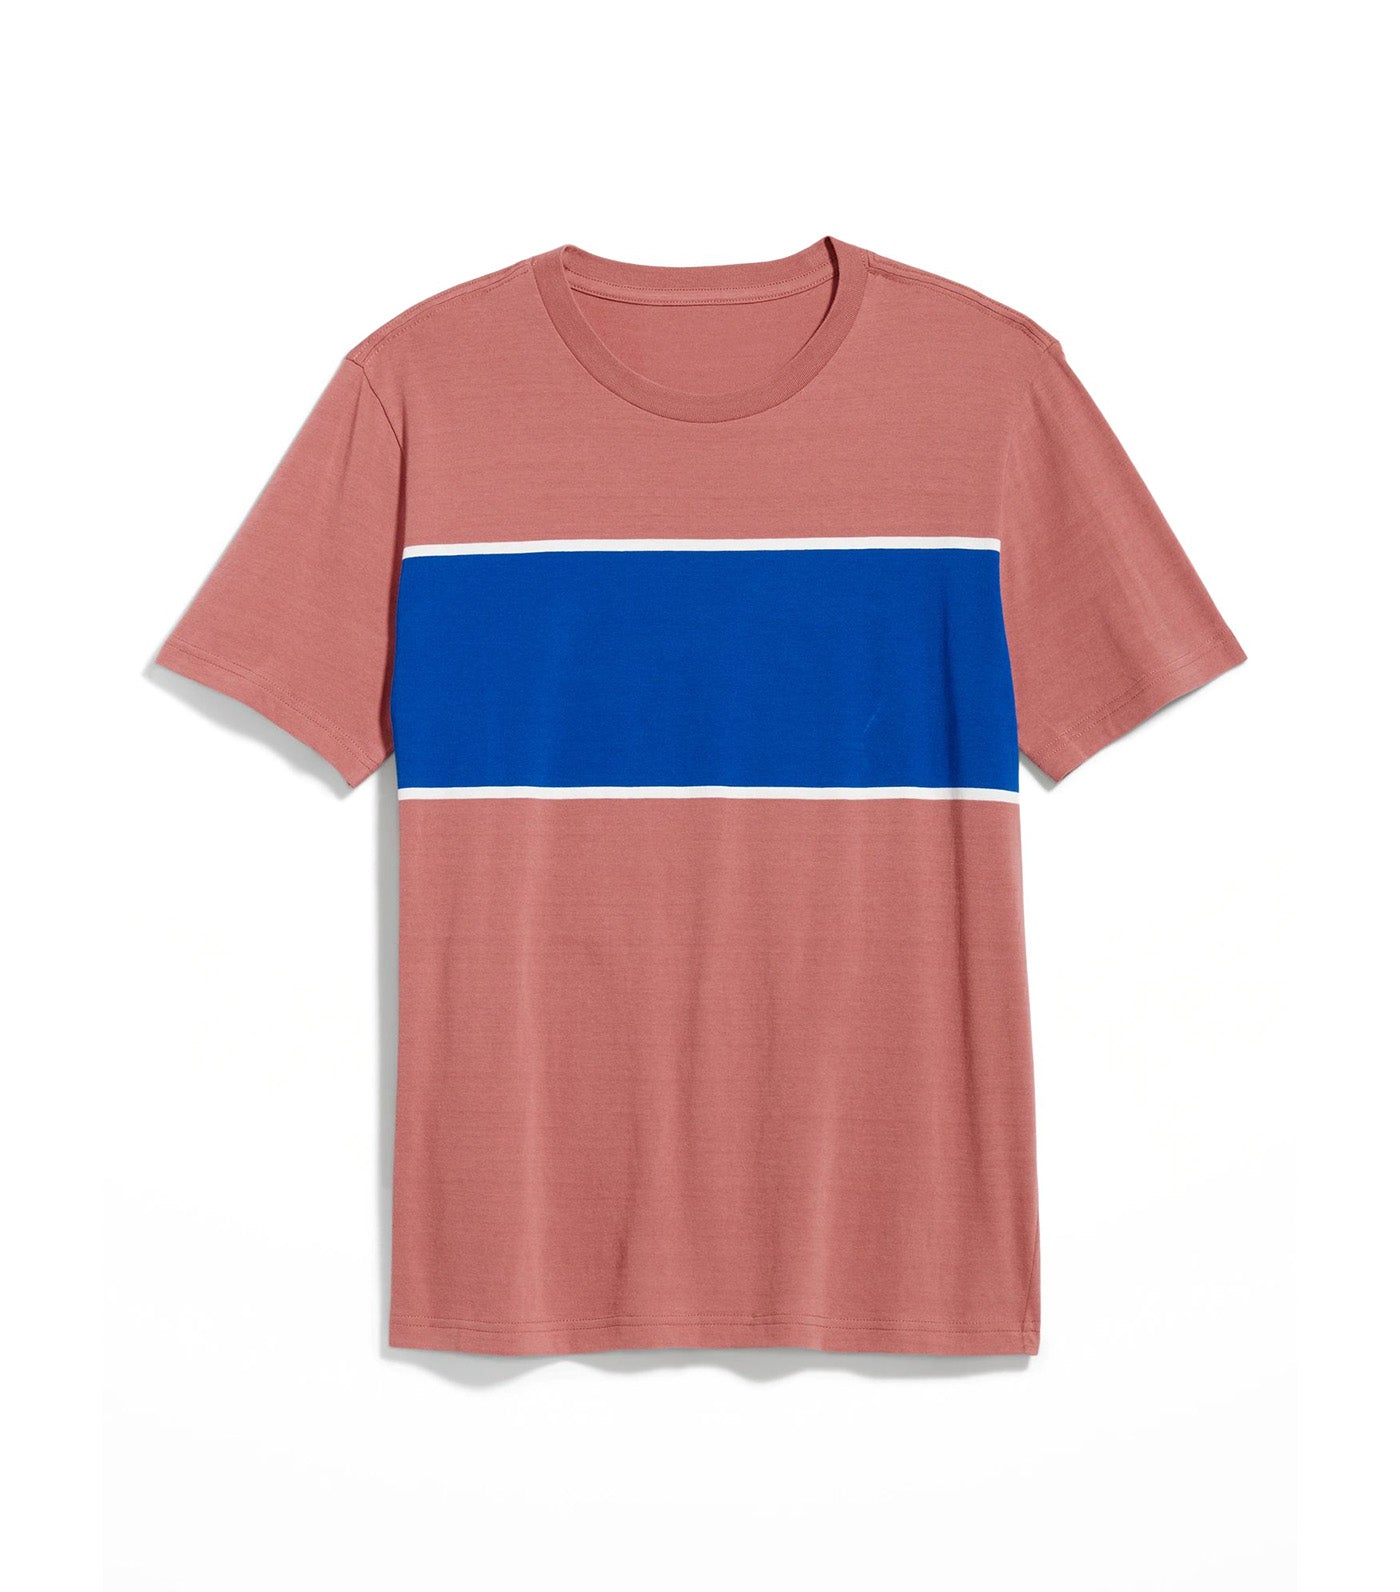 Crew-Neck Striped T-Shirt For Men Dusty Rose